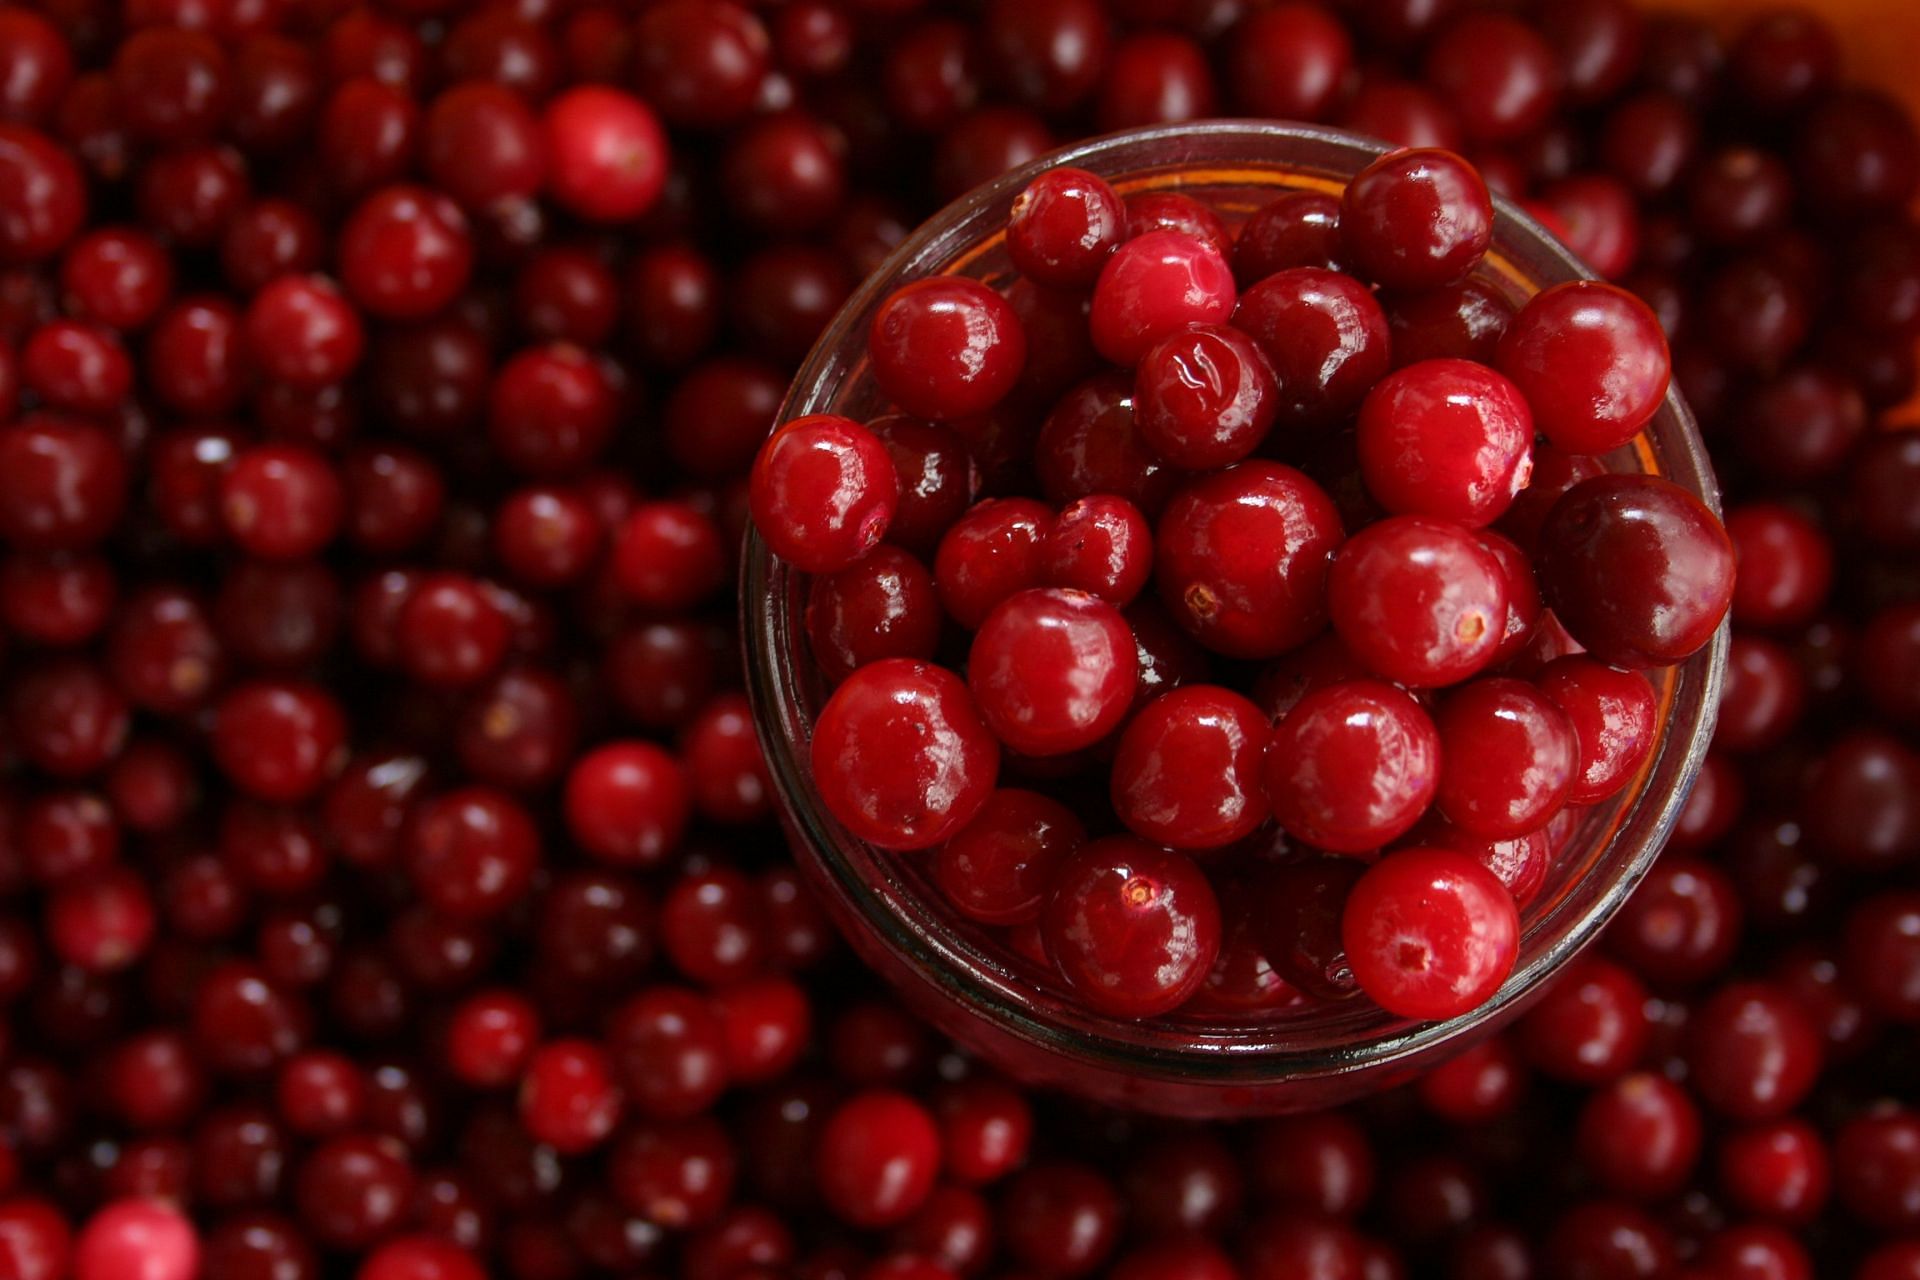 Tart and juicy cranberry: packed with health benefits and antioxidants (Image via Pexels)